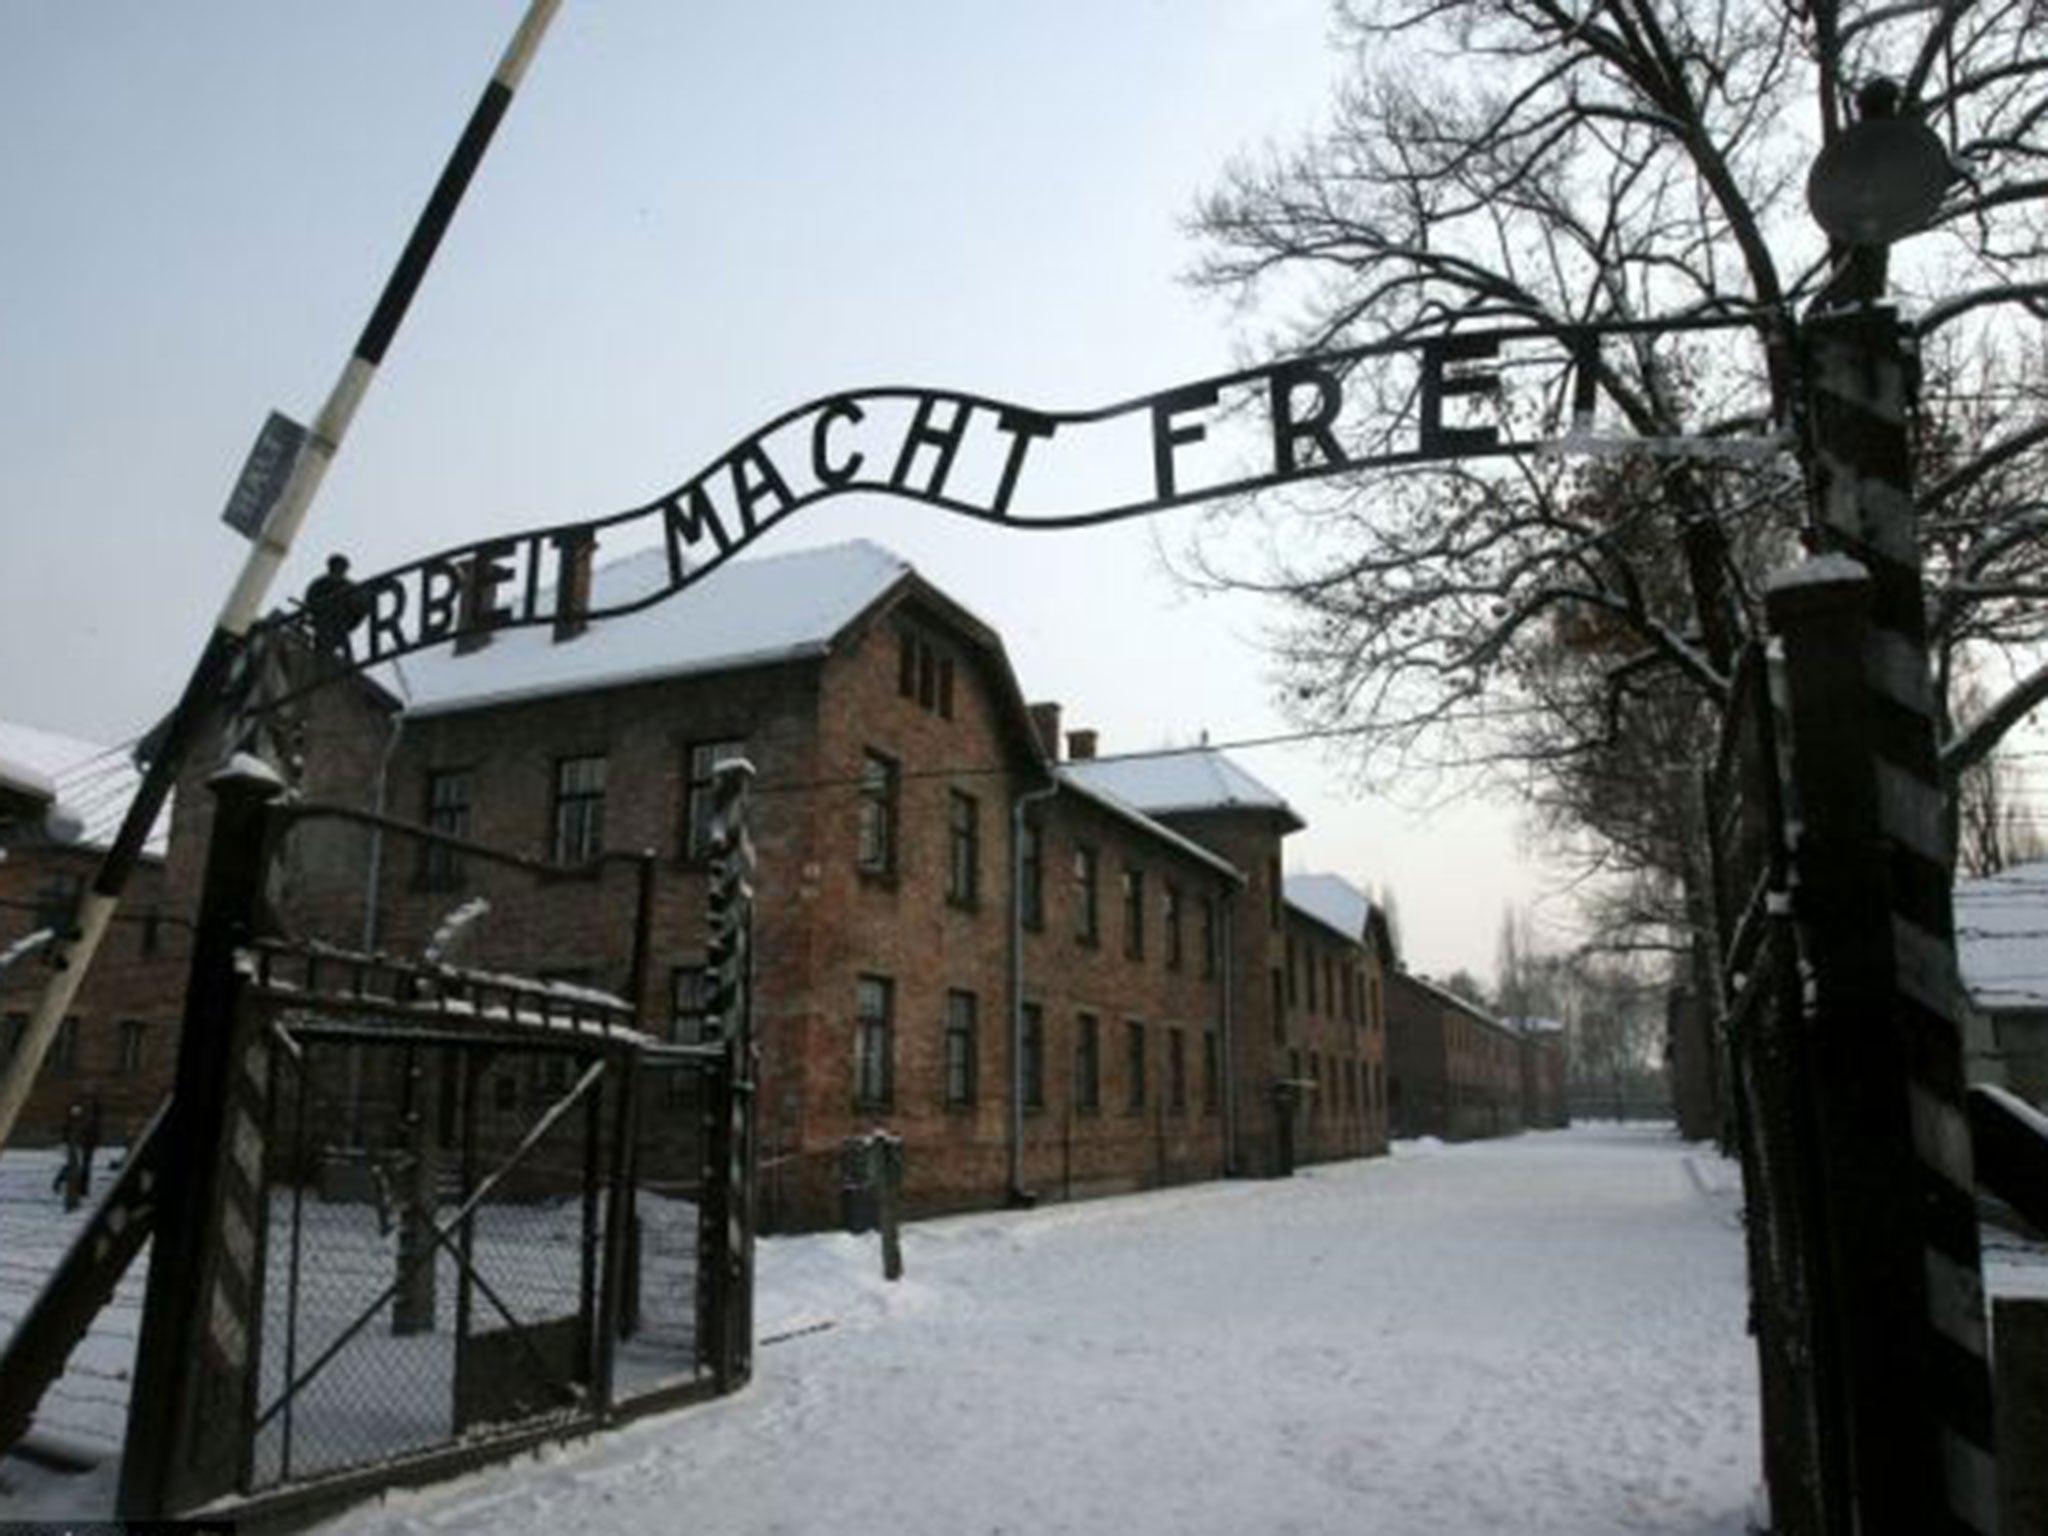 The main gate at Auschwitz. The inscription reads: "Arbeit macht frei" ("Work Makes Free" or "Work Liberates")